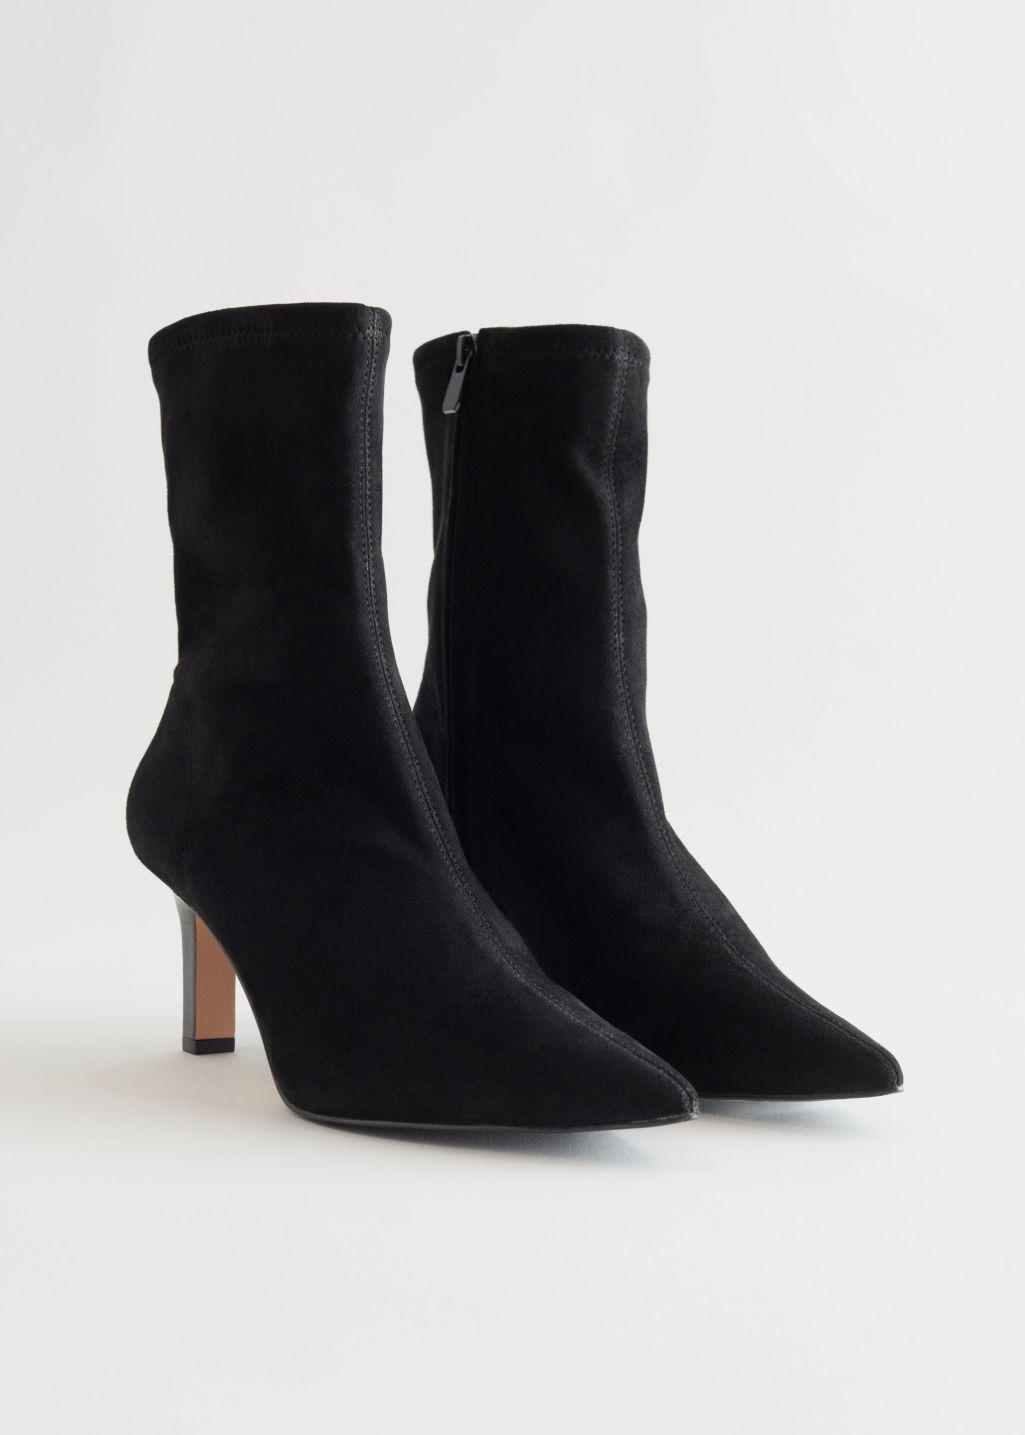 & Other Stories Pointy Suede Sock Boots in Black | Lyst